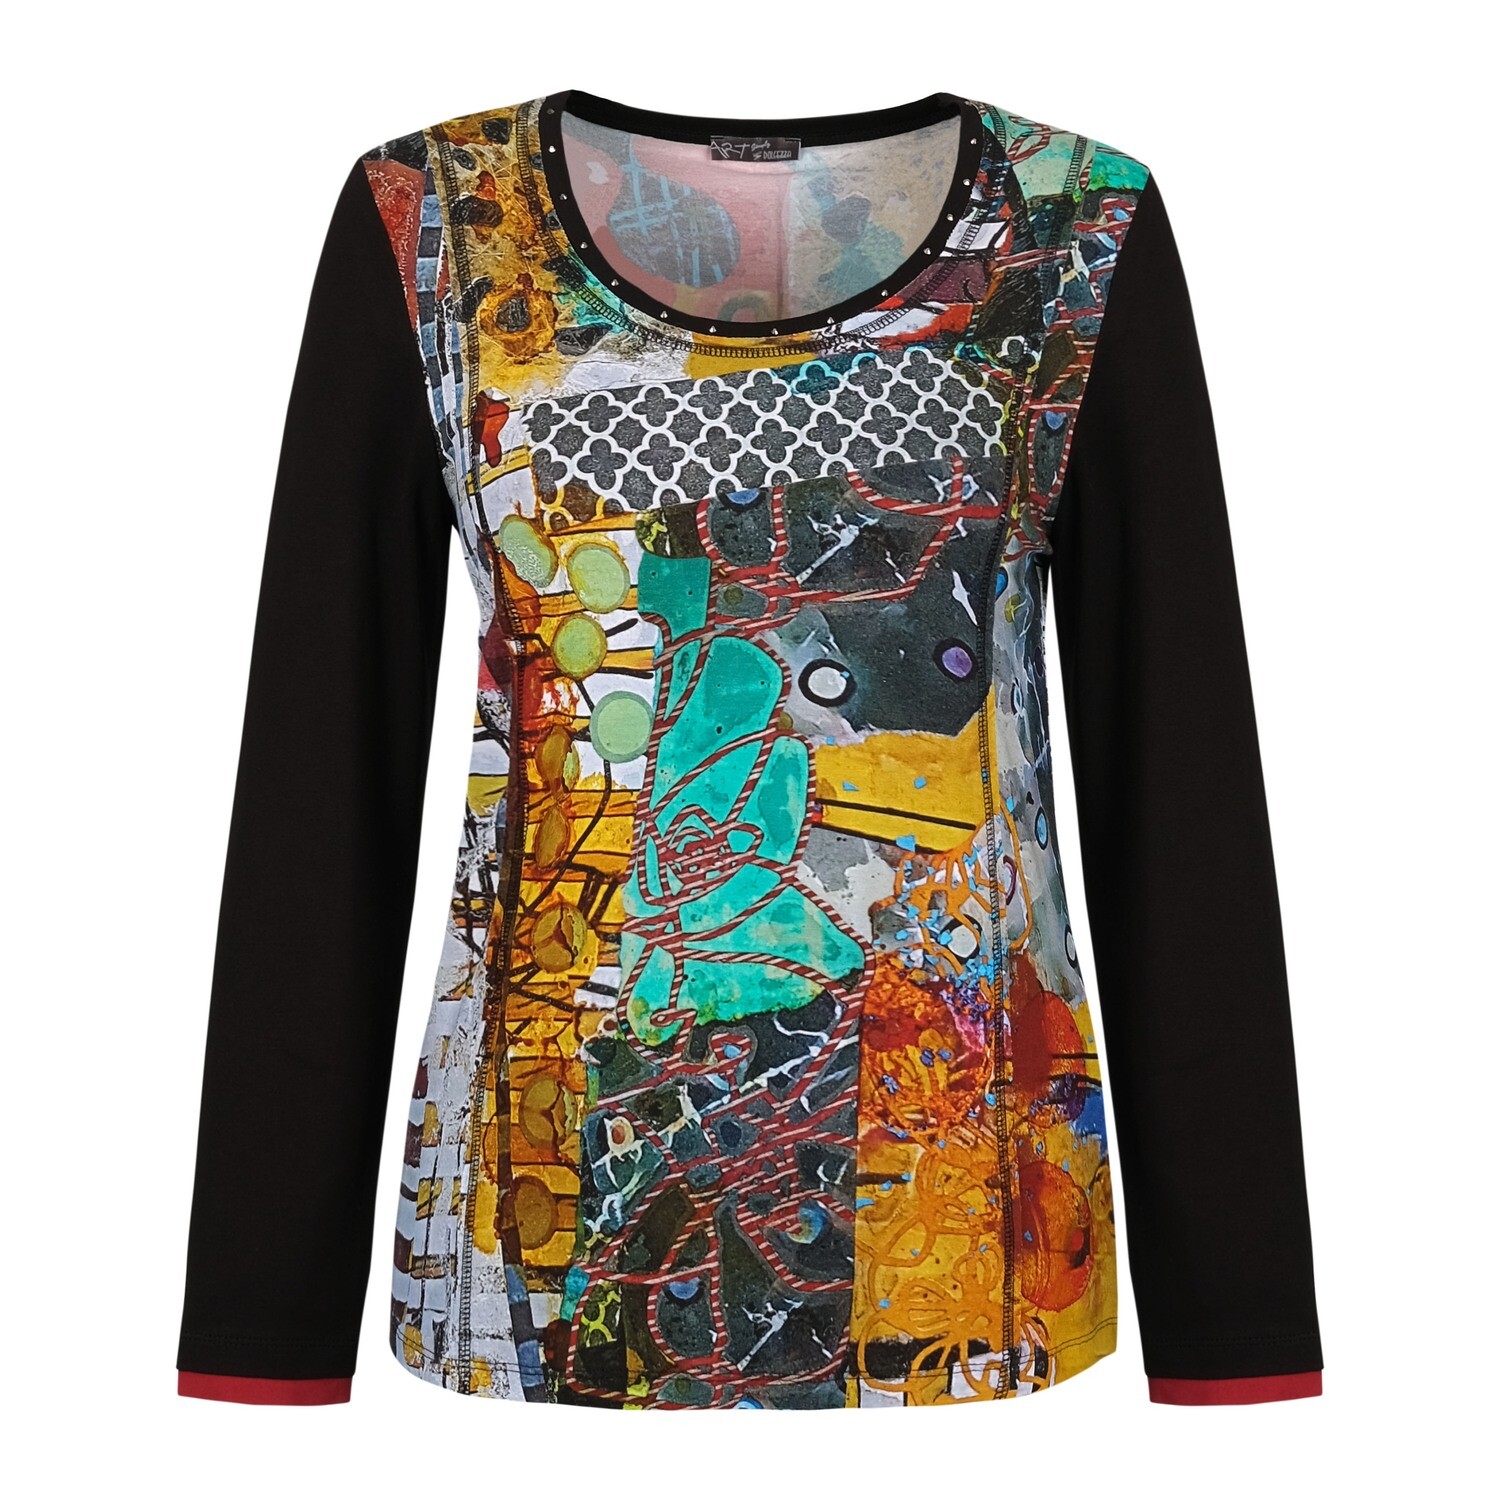 Simply Art Dolcezza: Colors Of Flight Aviary Abstract Art T-Shirt SOLD OUT